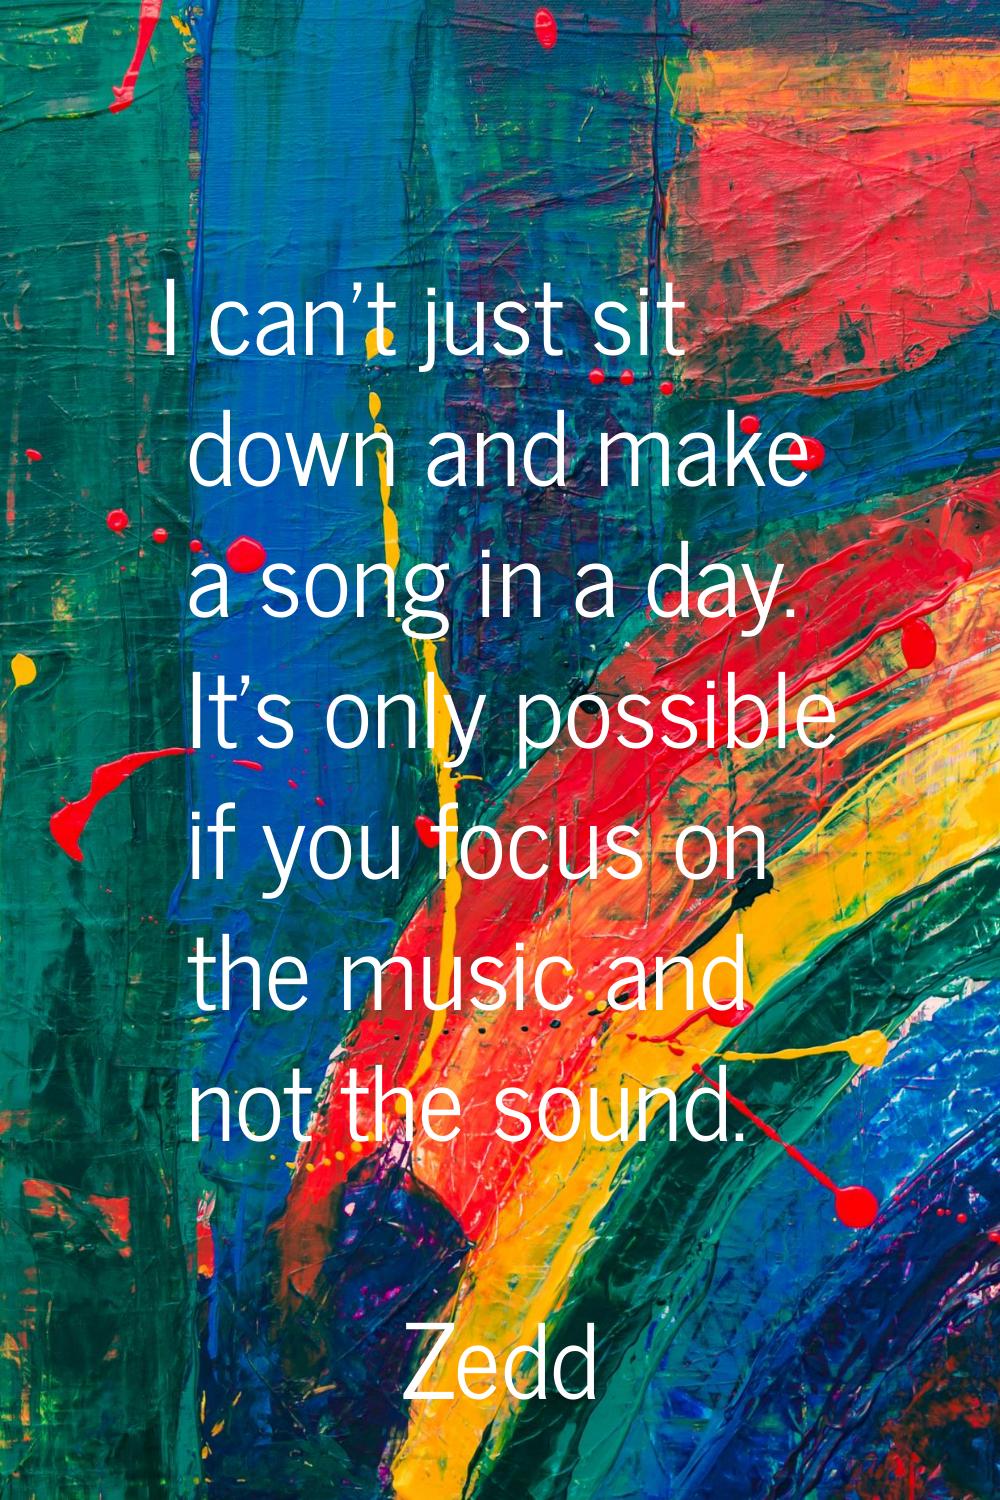 I can't just sit down and make a song in a day. It's only possible if you focus on the music and no